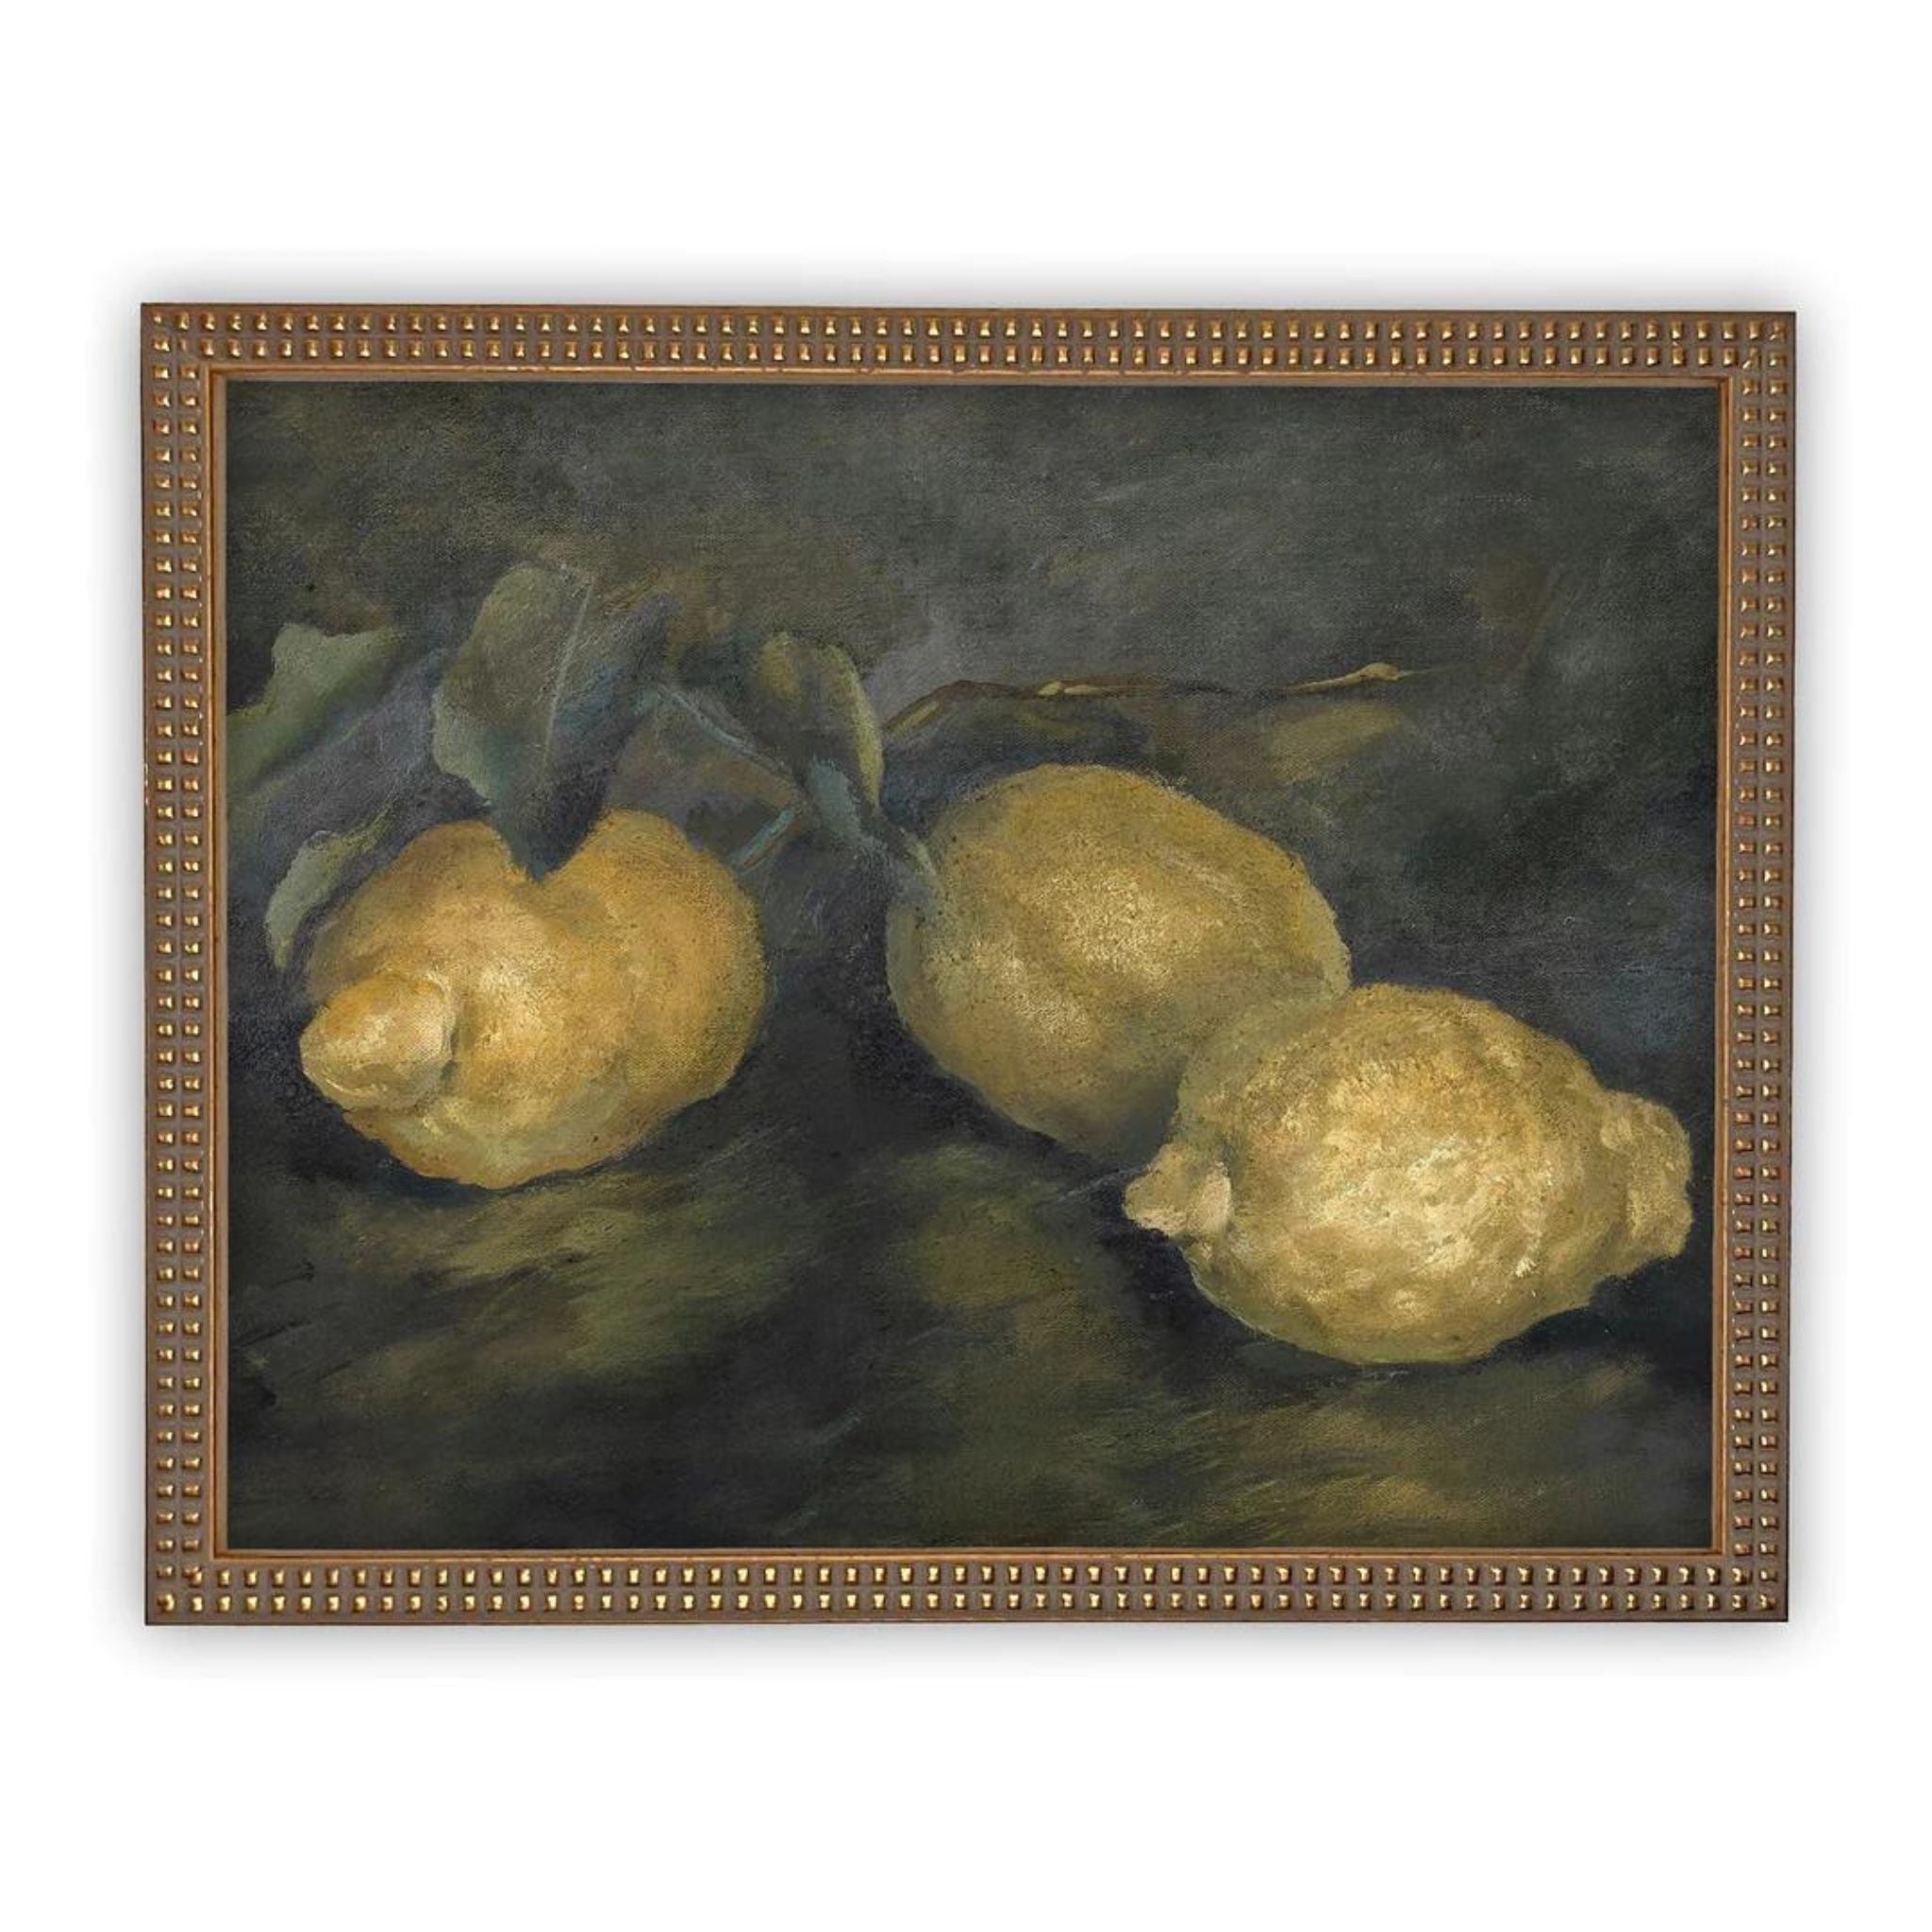 SIMPLY ELEVATED - The artwork is a reproduction (not an original painting) and will show original patina including grain, cracking, and general wear. This only adds to the true beauty of these paintings and gives it a more realistic look! To obtain a more “Vintage” look on stretched canvas.